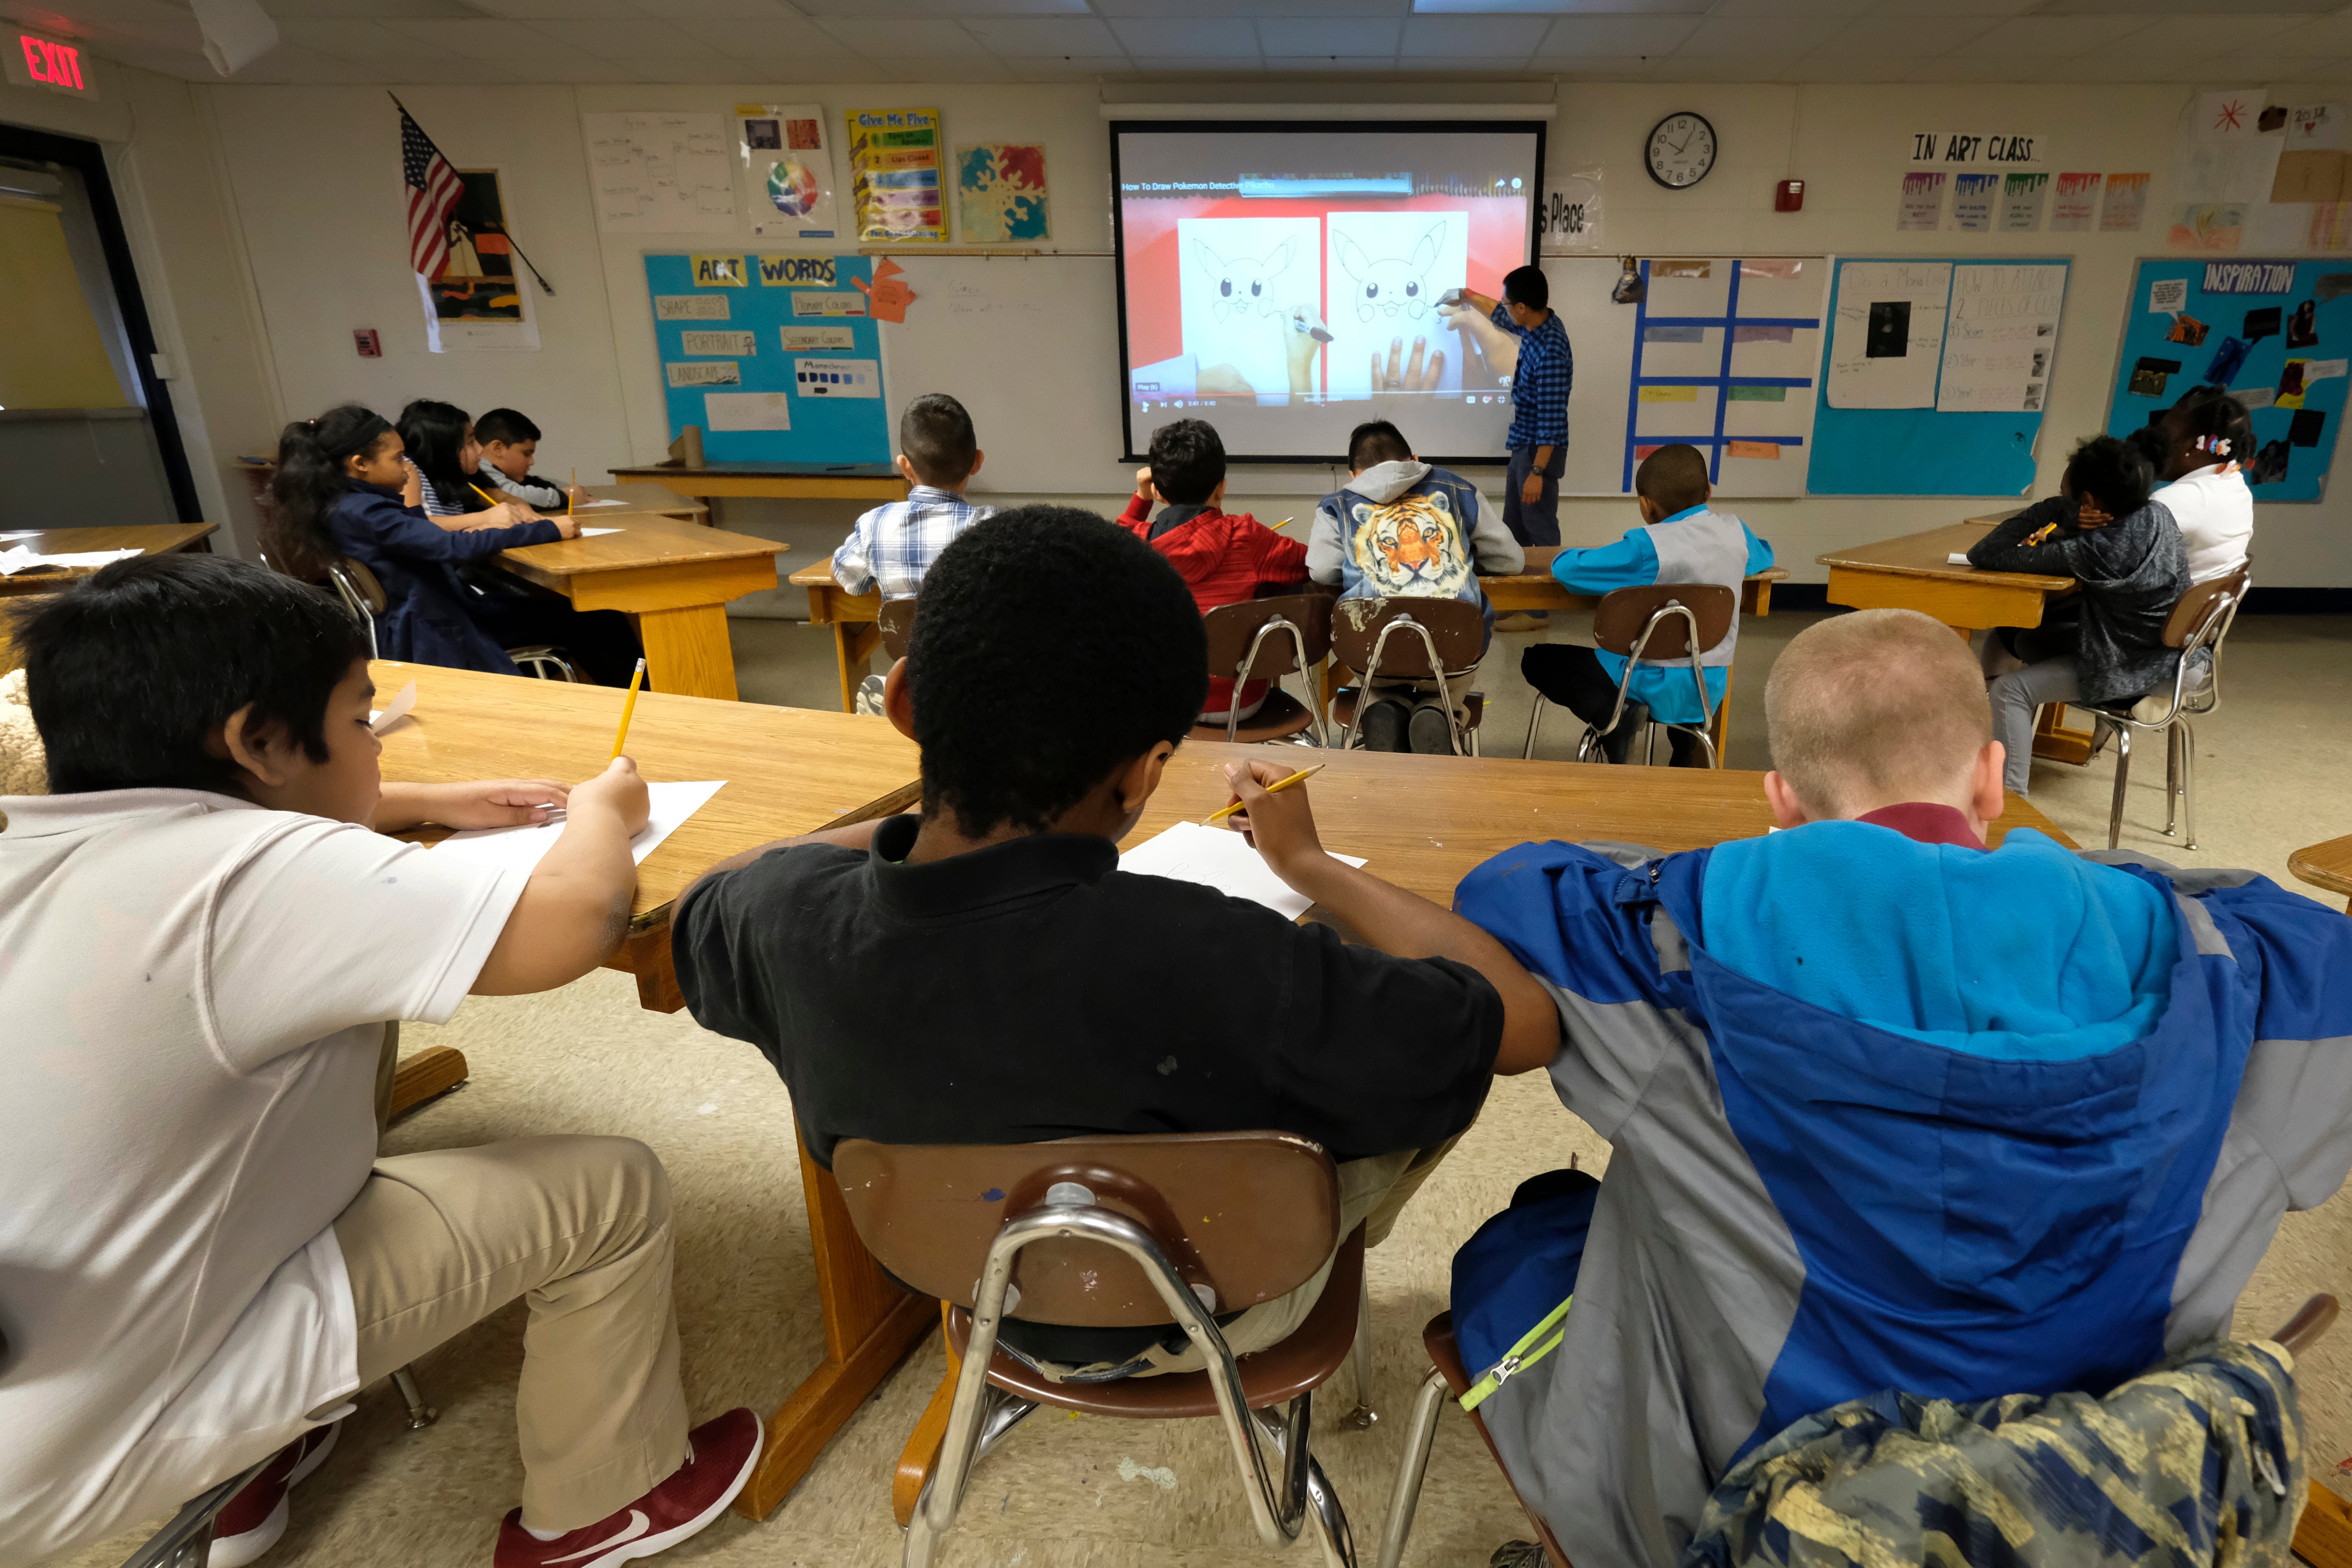 A row of three students sit at the back of the class, facing a projector screen where a teacher is showing a lesson.